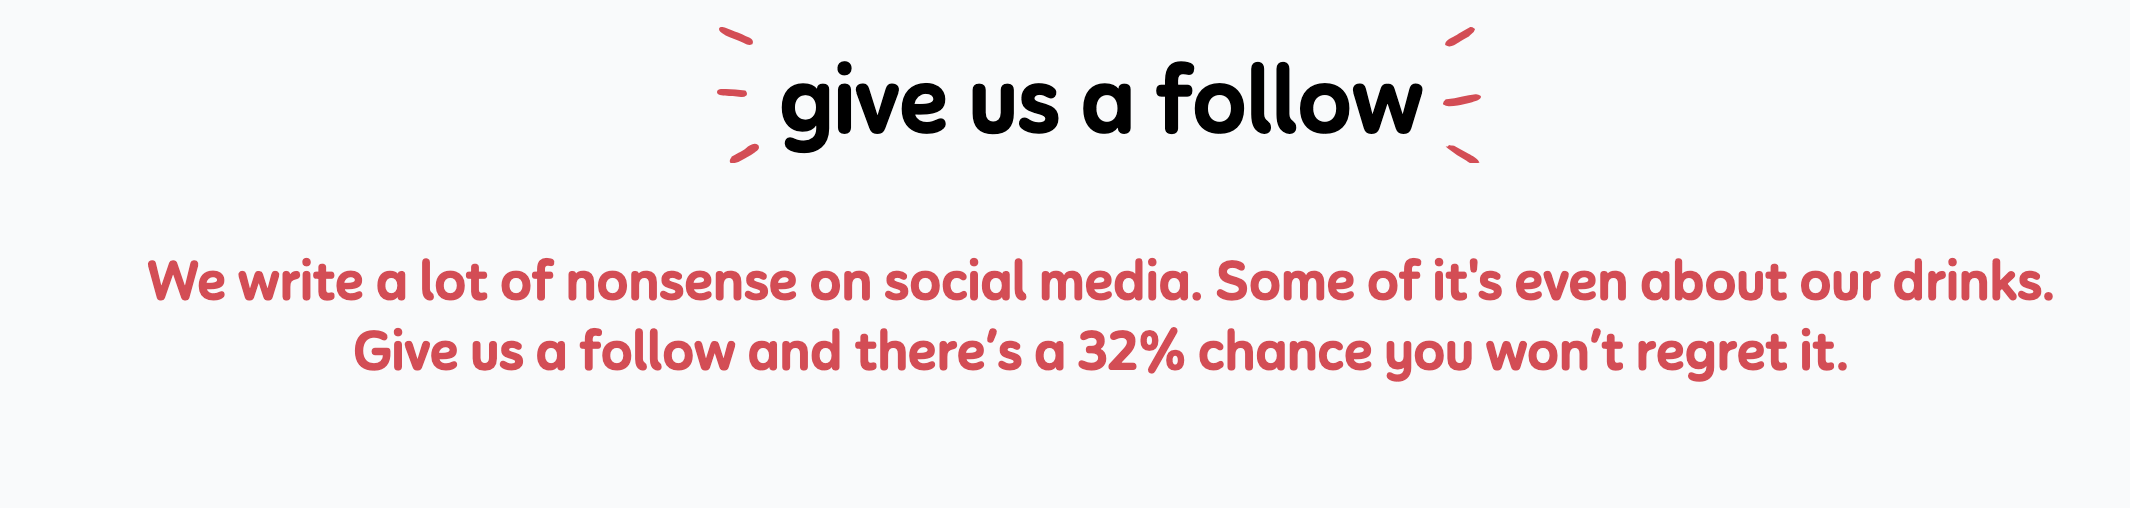 Screenshot of the section asking for followers on social media on innocent's website saying: "We write a lot of nonsense on social media. Some of it's even about our drinks. Give us a follow and there's a 32% chance you won't regret it."